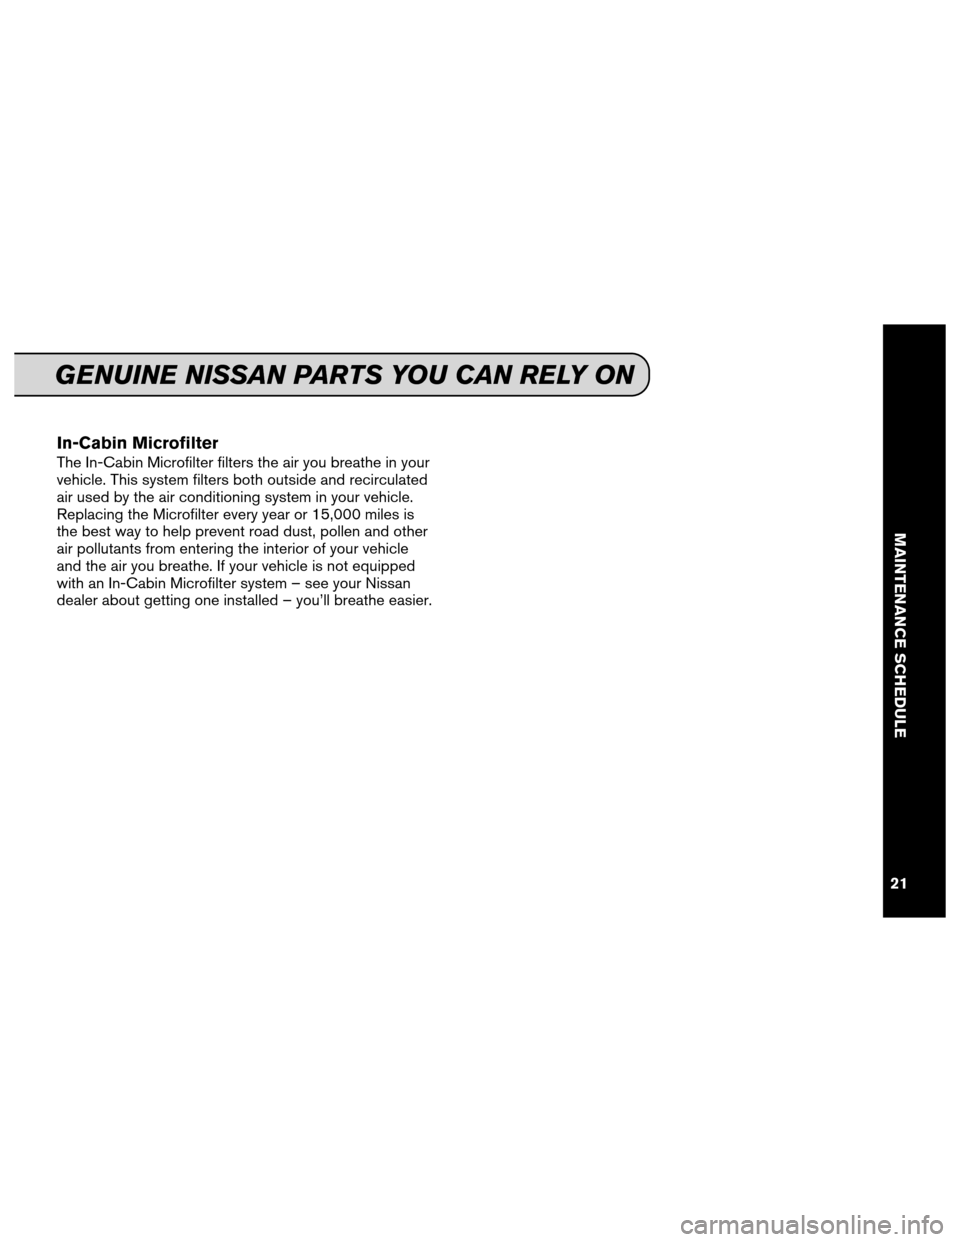 NISSAN MAXIMA 2013 A35 / 7.G Service And Maintenance Guide In-Cabin Microfilter
The In-Cabin Microfilter filters the air you breathe in your
vehicle. This system filters both outside and recirculated
air used by the air conditioning system in your vehicle.
Re